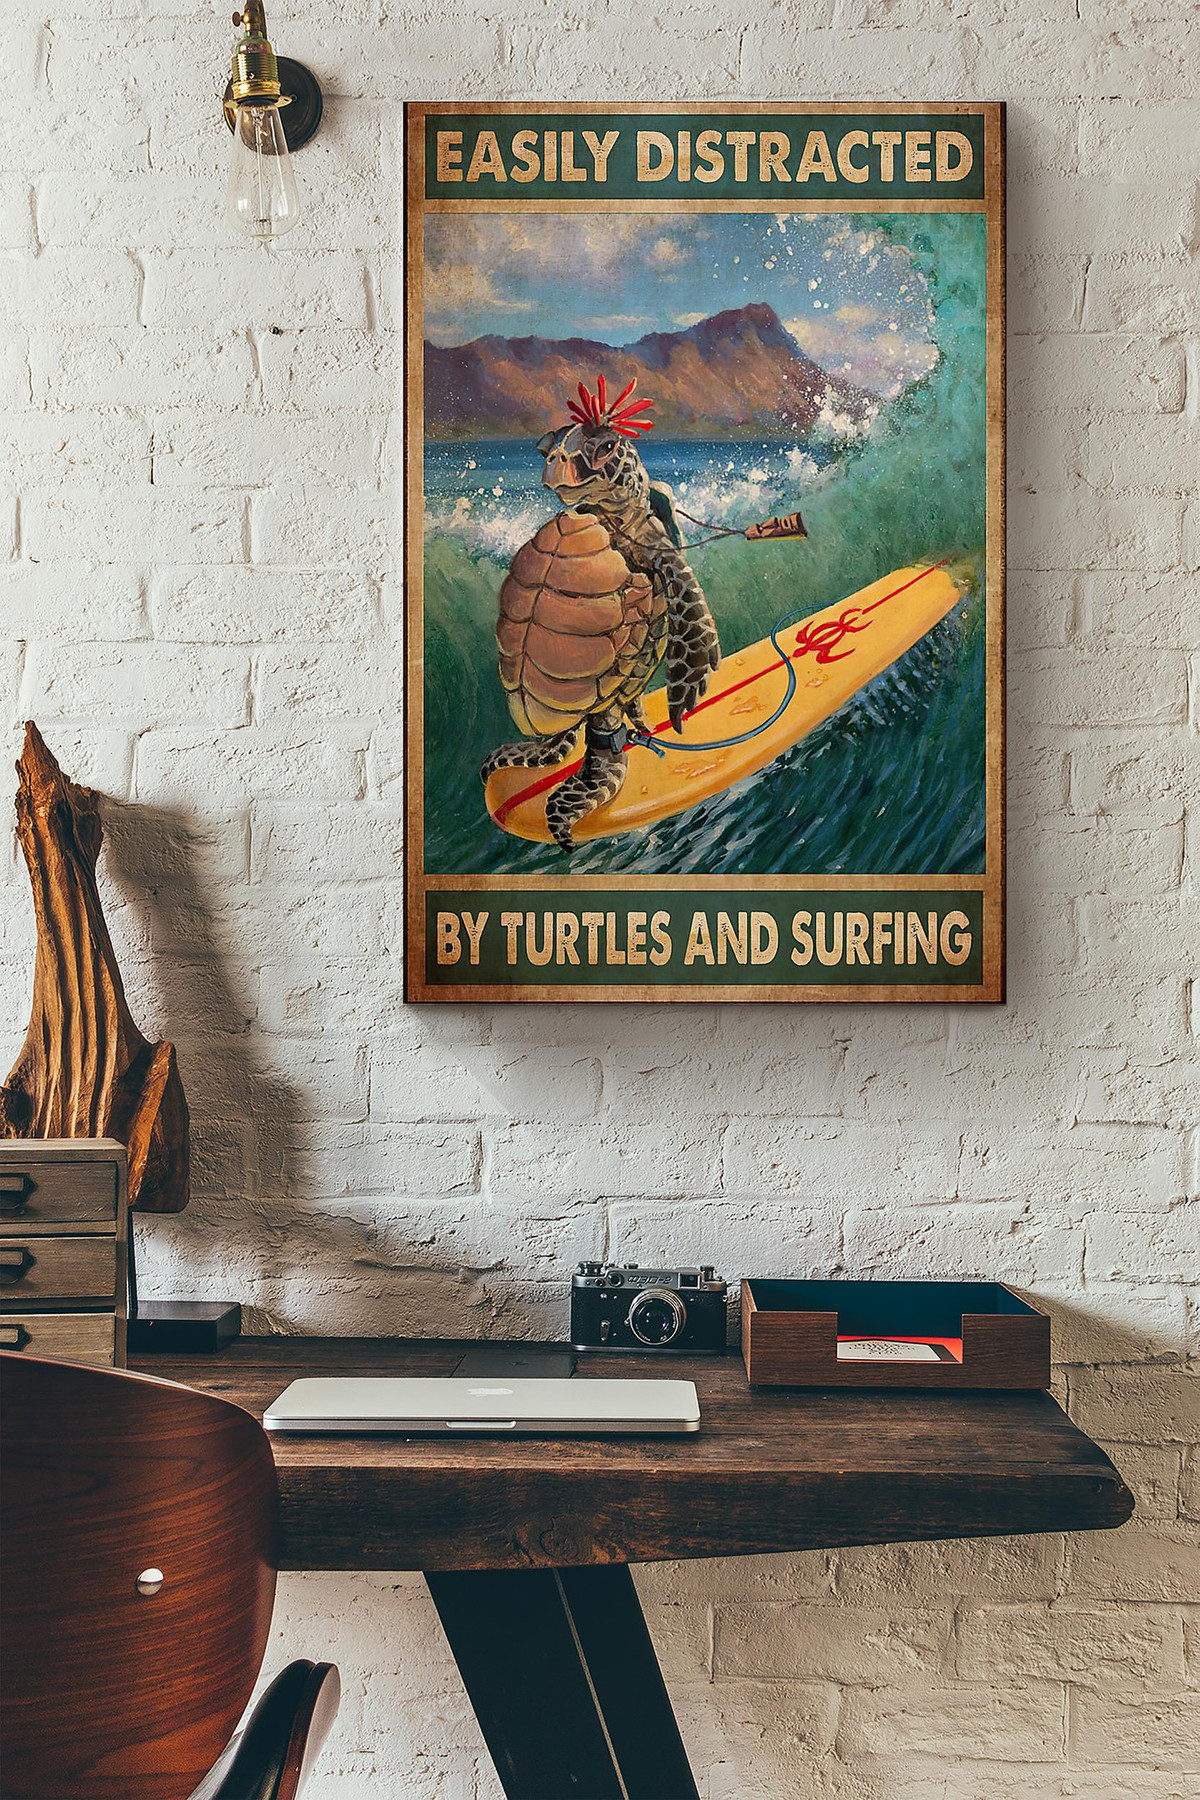 Hawaii Surfing Easily Distracted By Turtles And Surfing Canvas Painting Ideas, Canvas Hanging Prints, Gift Idea Framed Prints, Canvas Paintings Wrapped Canvas 8x10